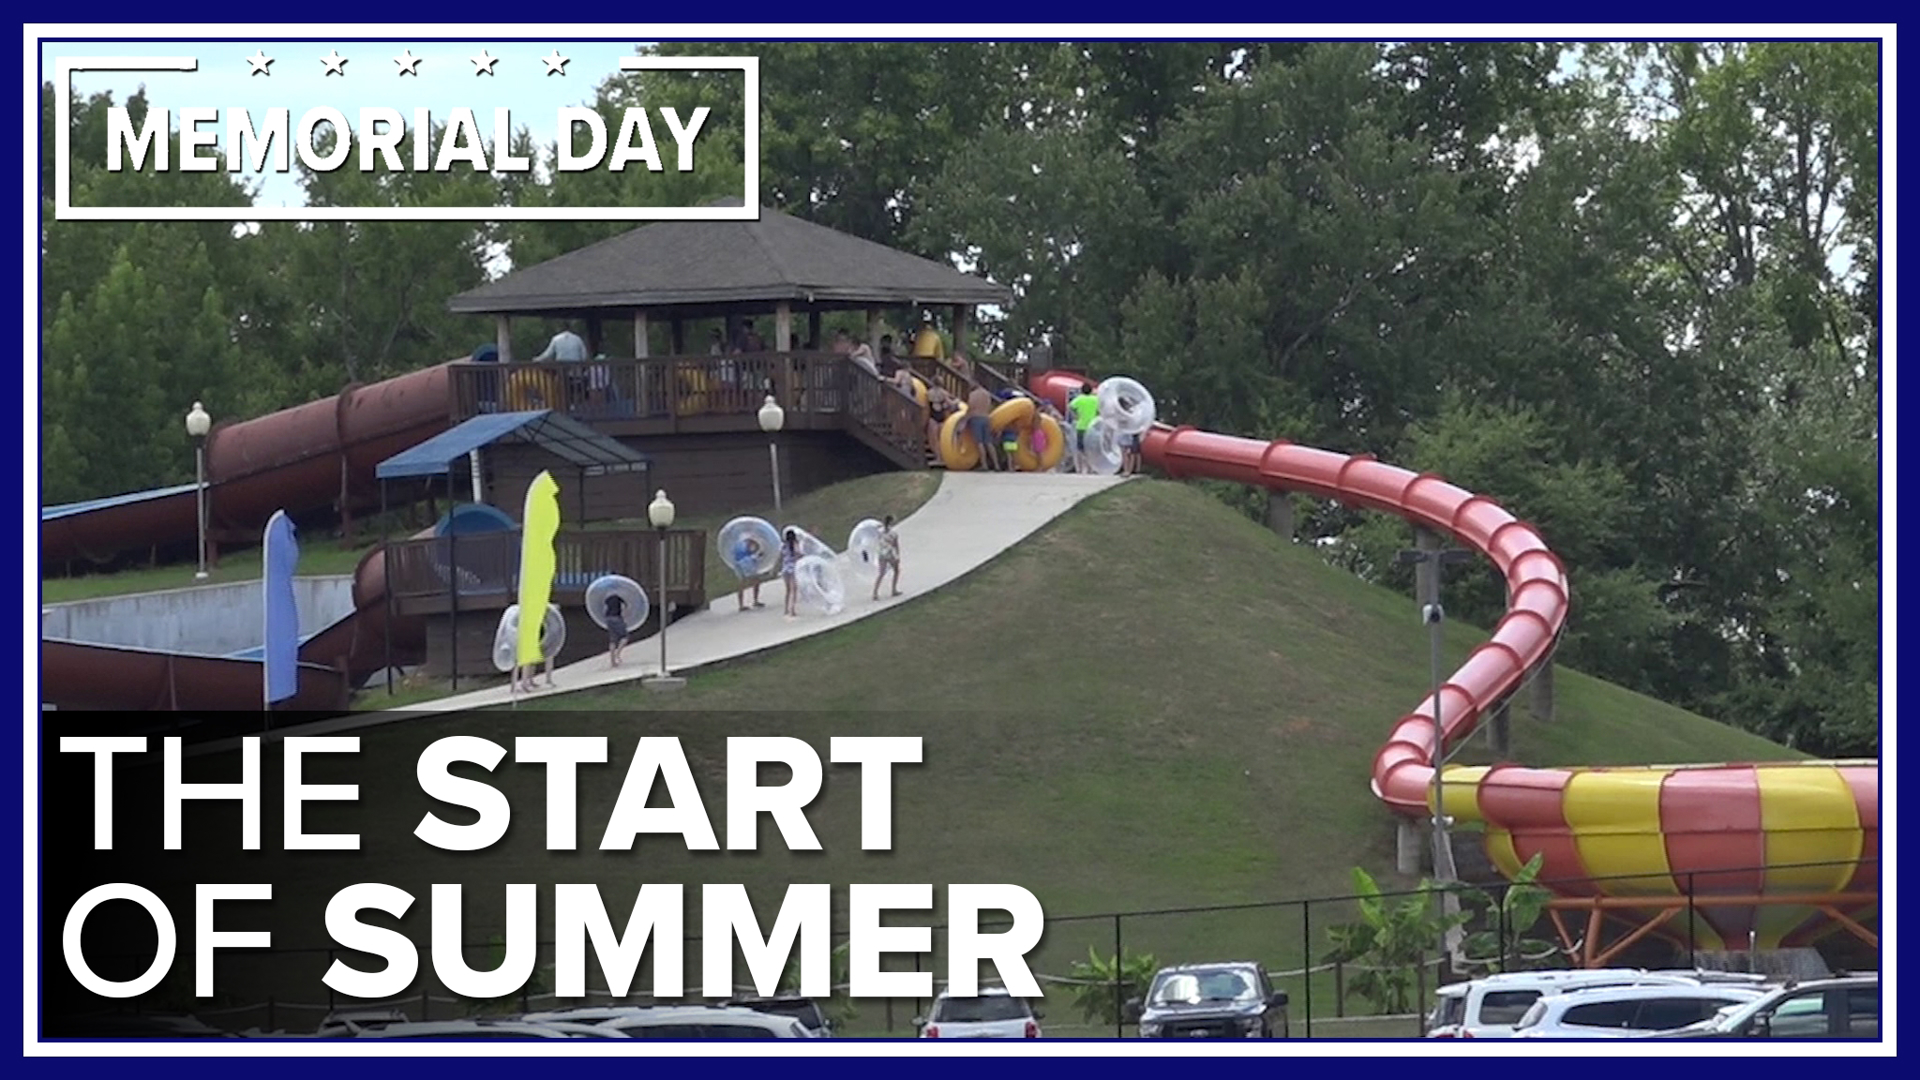 The holiday has come to be known as the unofficial start to the summer season, which means lots of people out to jumpstart the fun.